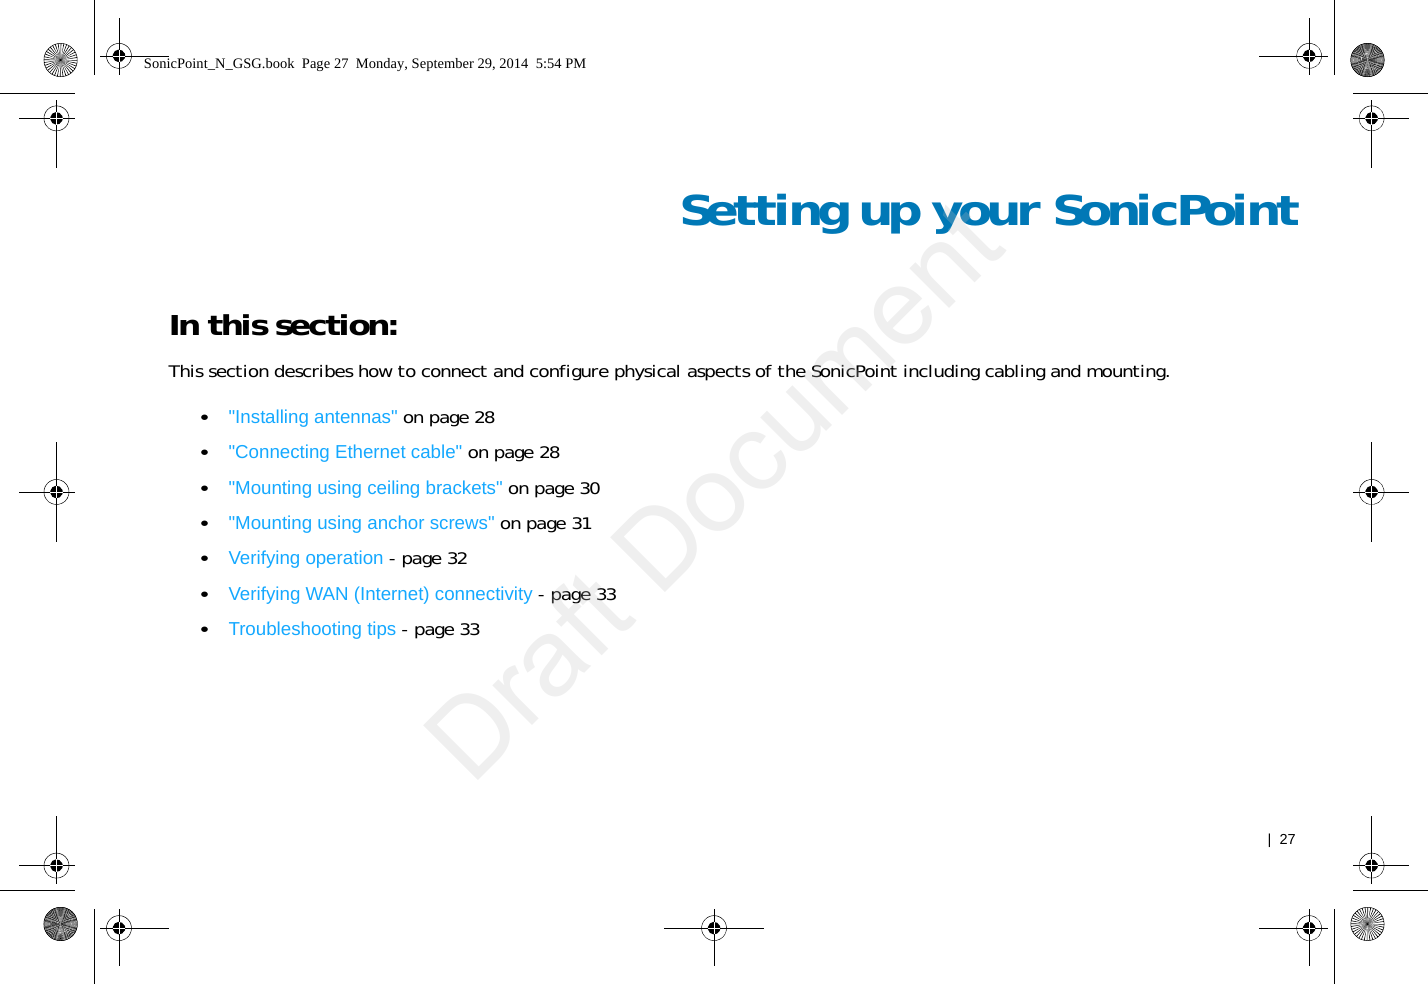   |  27Setting up your SonicPointIn this section:This section describes how to connect and configure physical aspects of the SonicPoint including cabling and mounting.•&quot;Installing antennas&quot; on page 28•&quot;Connecting Ethernet cable&quot; on page 28•&quot;Mounting using ceiling brackets&quot; on page 30•&quot;Mounting using anchor screws&quot; on page 31•Verifying operation - page 32•Verifying WAN (Internet) connectivity - page 33•Troubleshooting tips - page 33SonicPoint_N_GSG.book  Page 27  Monday, September 29, 2014  5:54 PMDraft Document